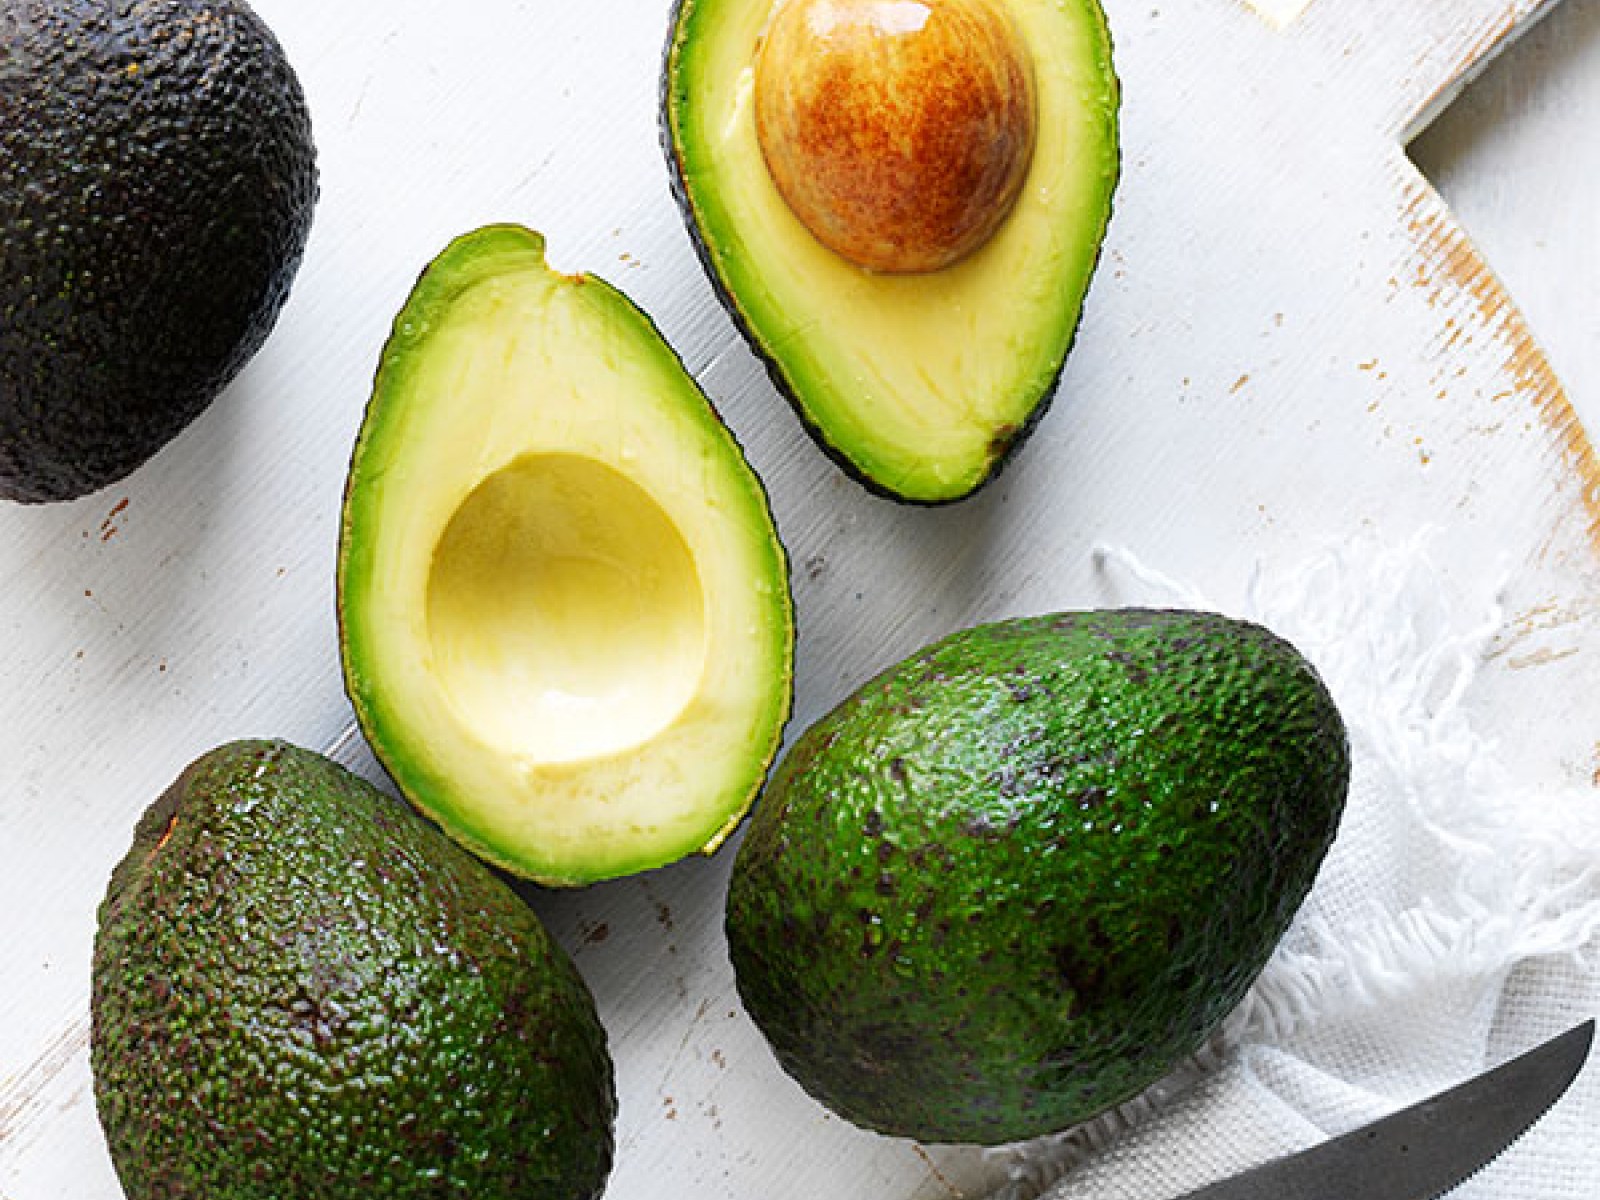 https://myfoodbook.com.au/sites/default/files/styles/4x3/public/collections_image/hass-avocado-ID_0255.jpg